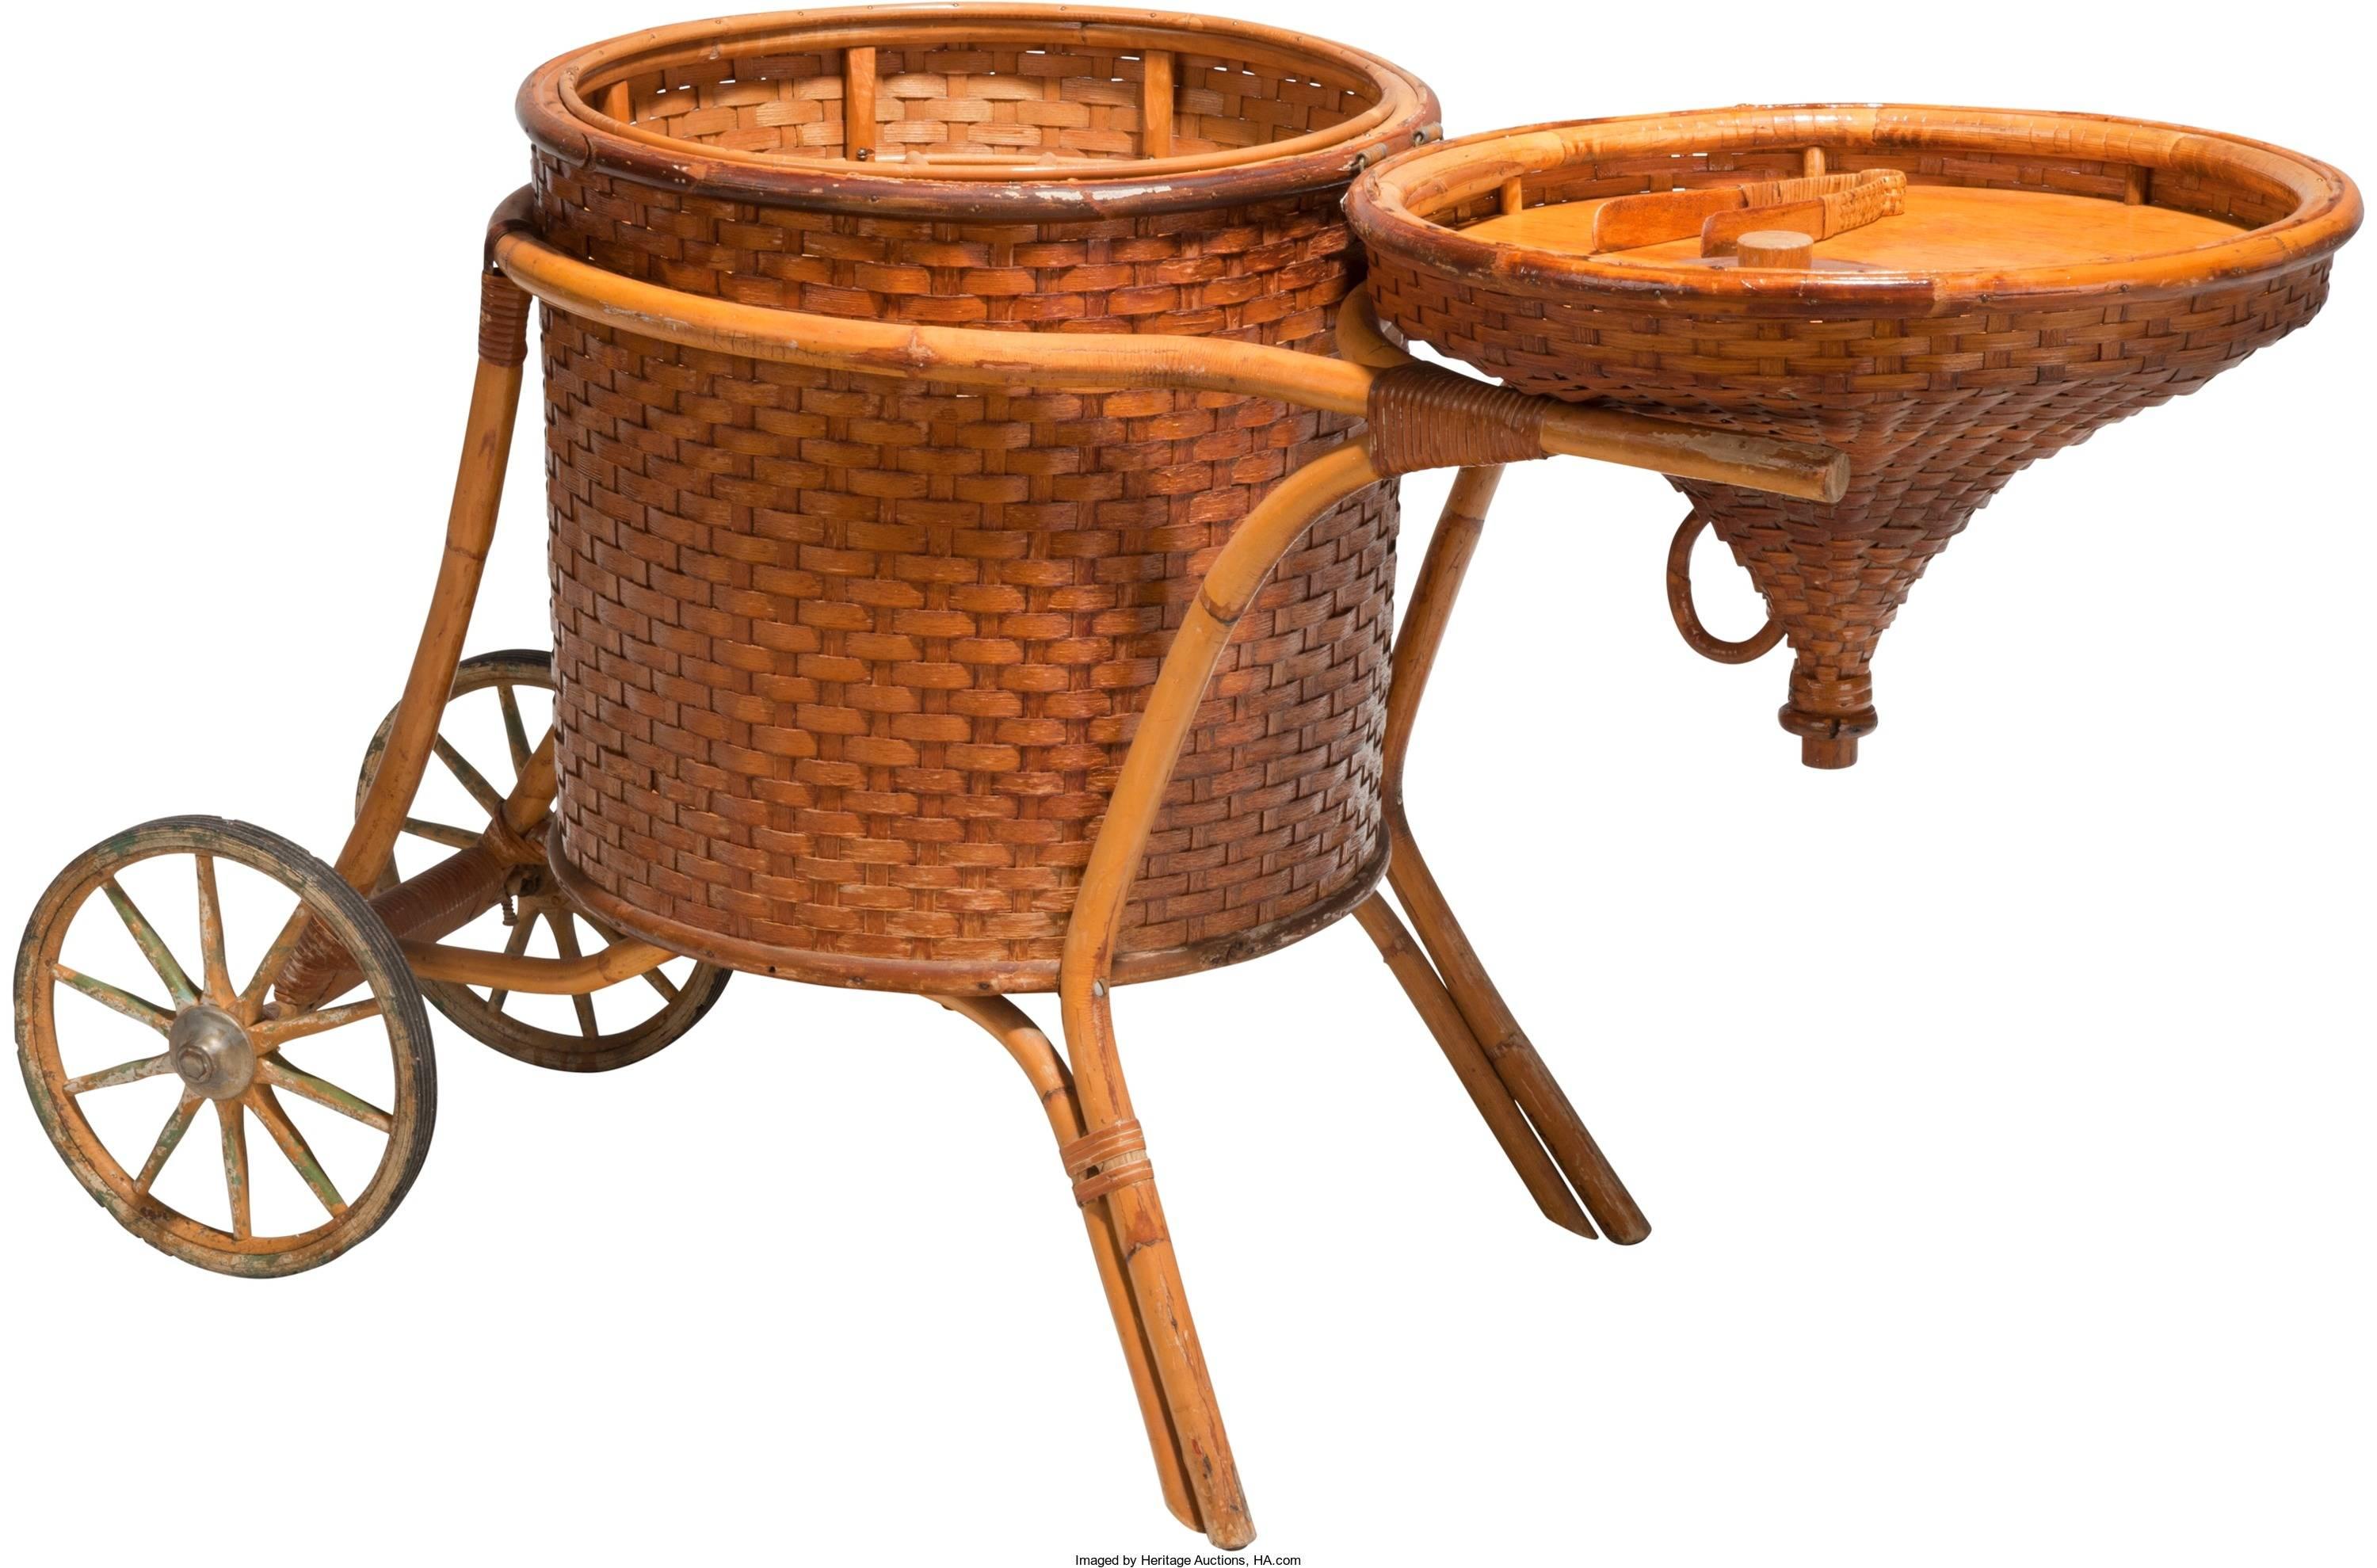 This mid-20th century woven cane and rattan bar cart was from the personal collection of Shirley temple black. Created in Hawaii, circa 1937, this bar cart has a bottle-form shape, a hinged lid, and is raised on a wooden frame with two wheels in the